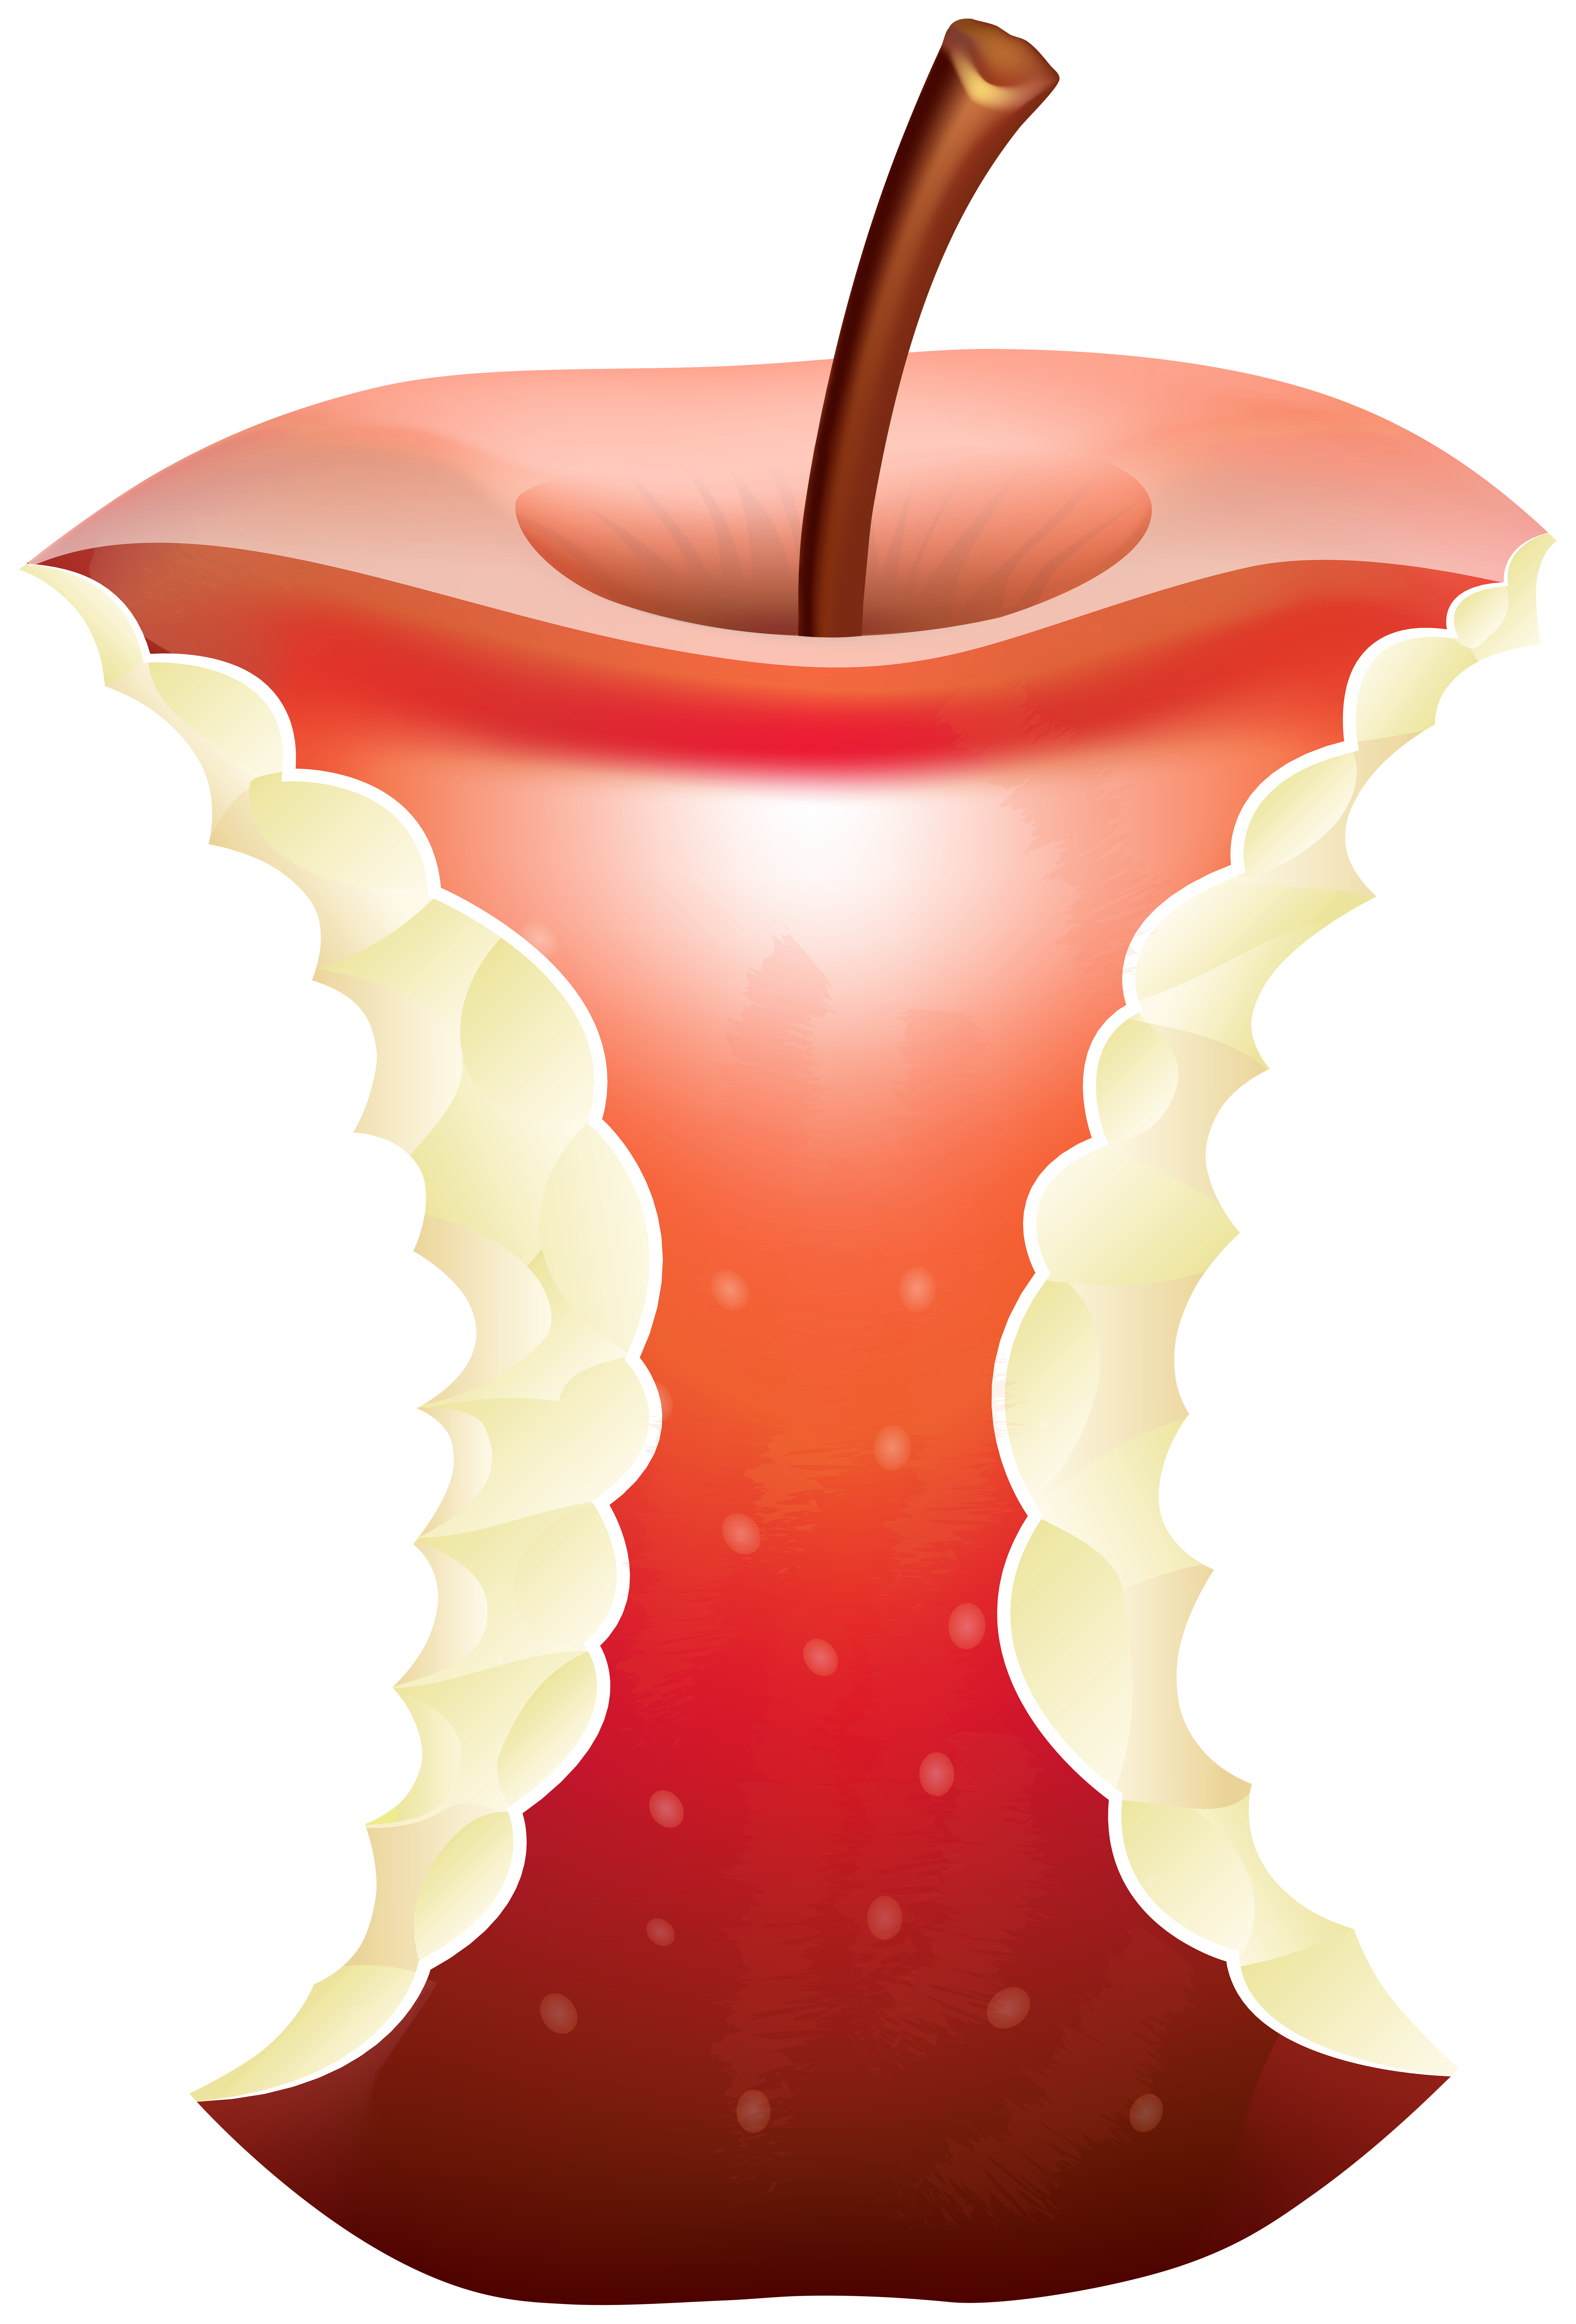 Red Apple Bite PNG Clipart.